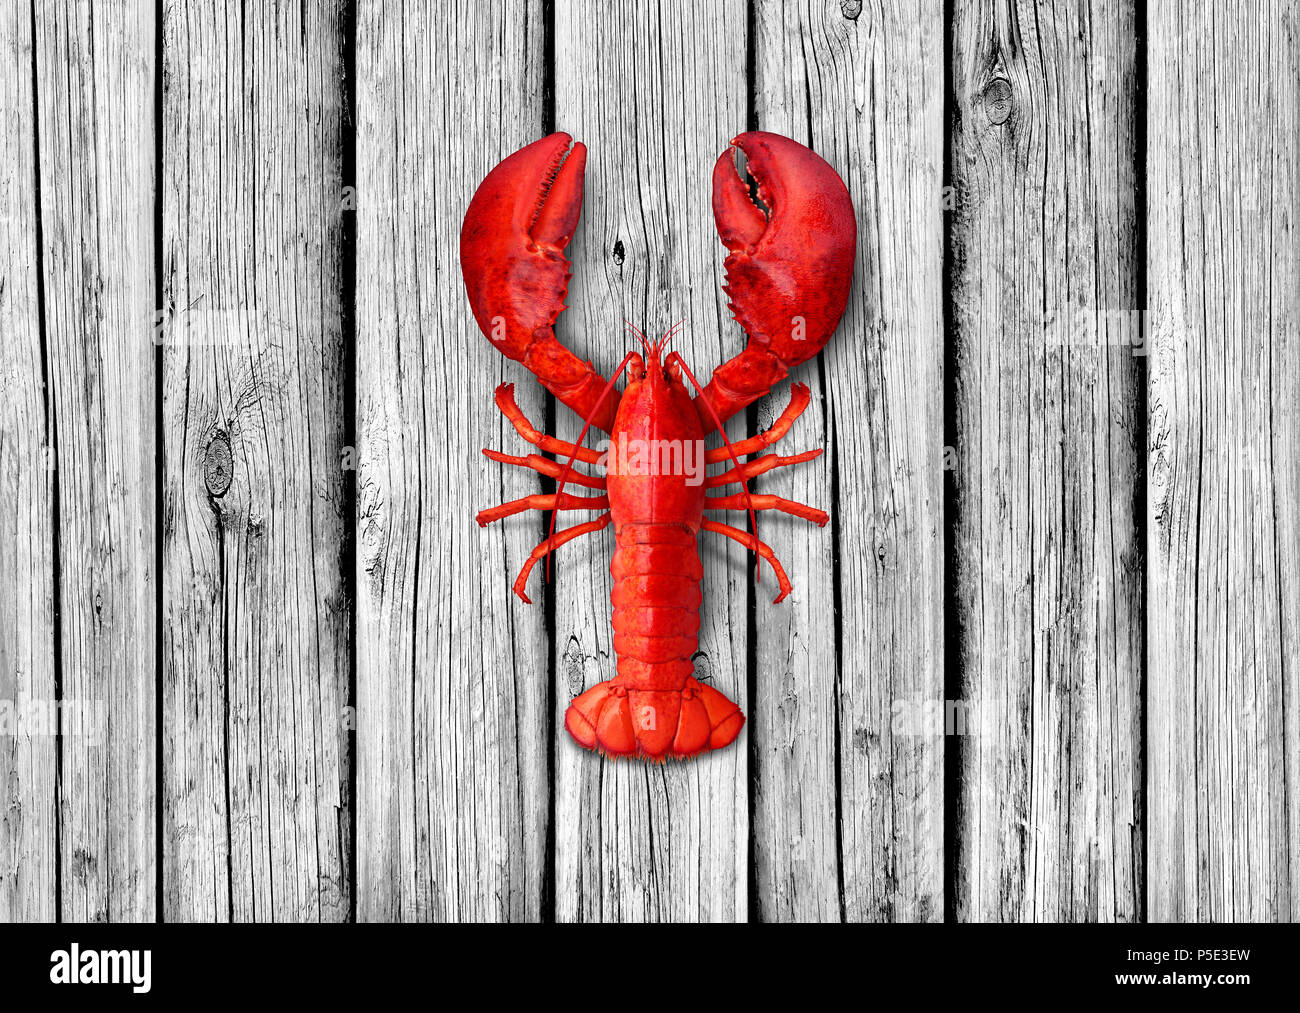 Lobster on old white wood background as weathered copy space representing seafood and marine ocean or sea lifestyle. Stock Photo